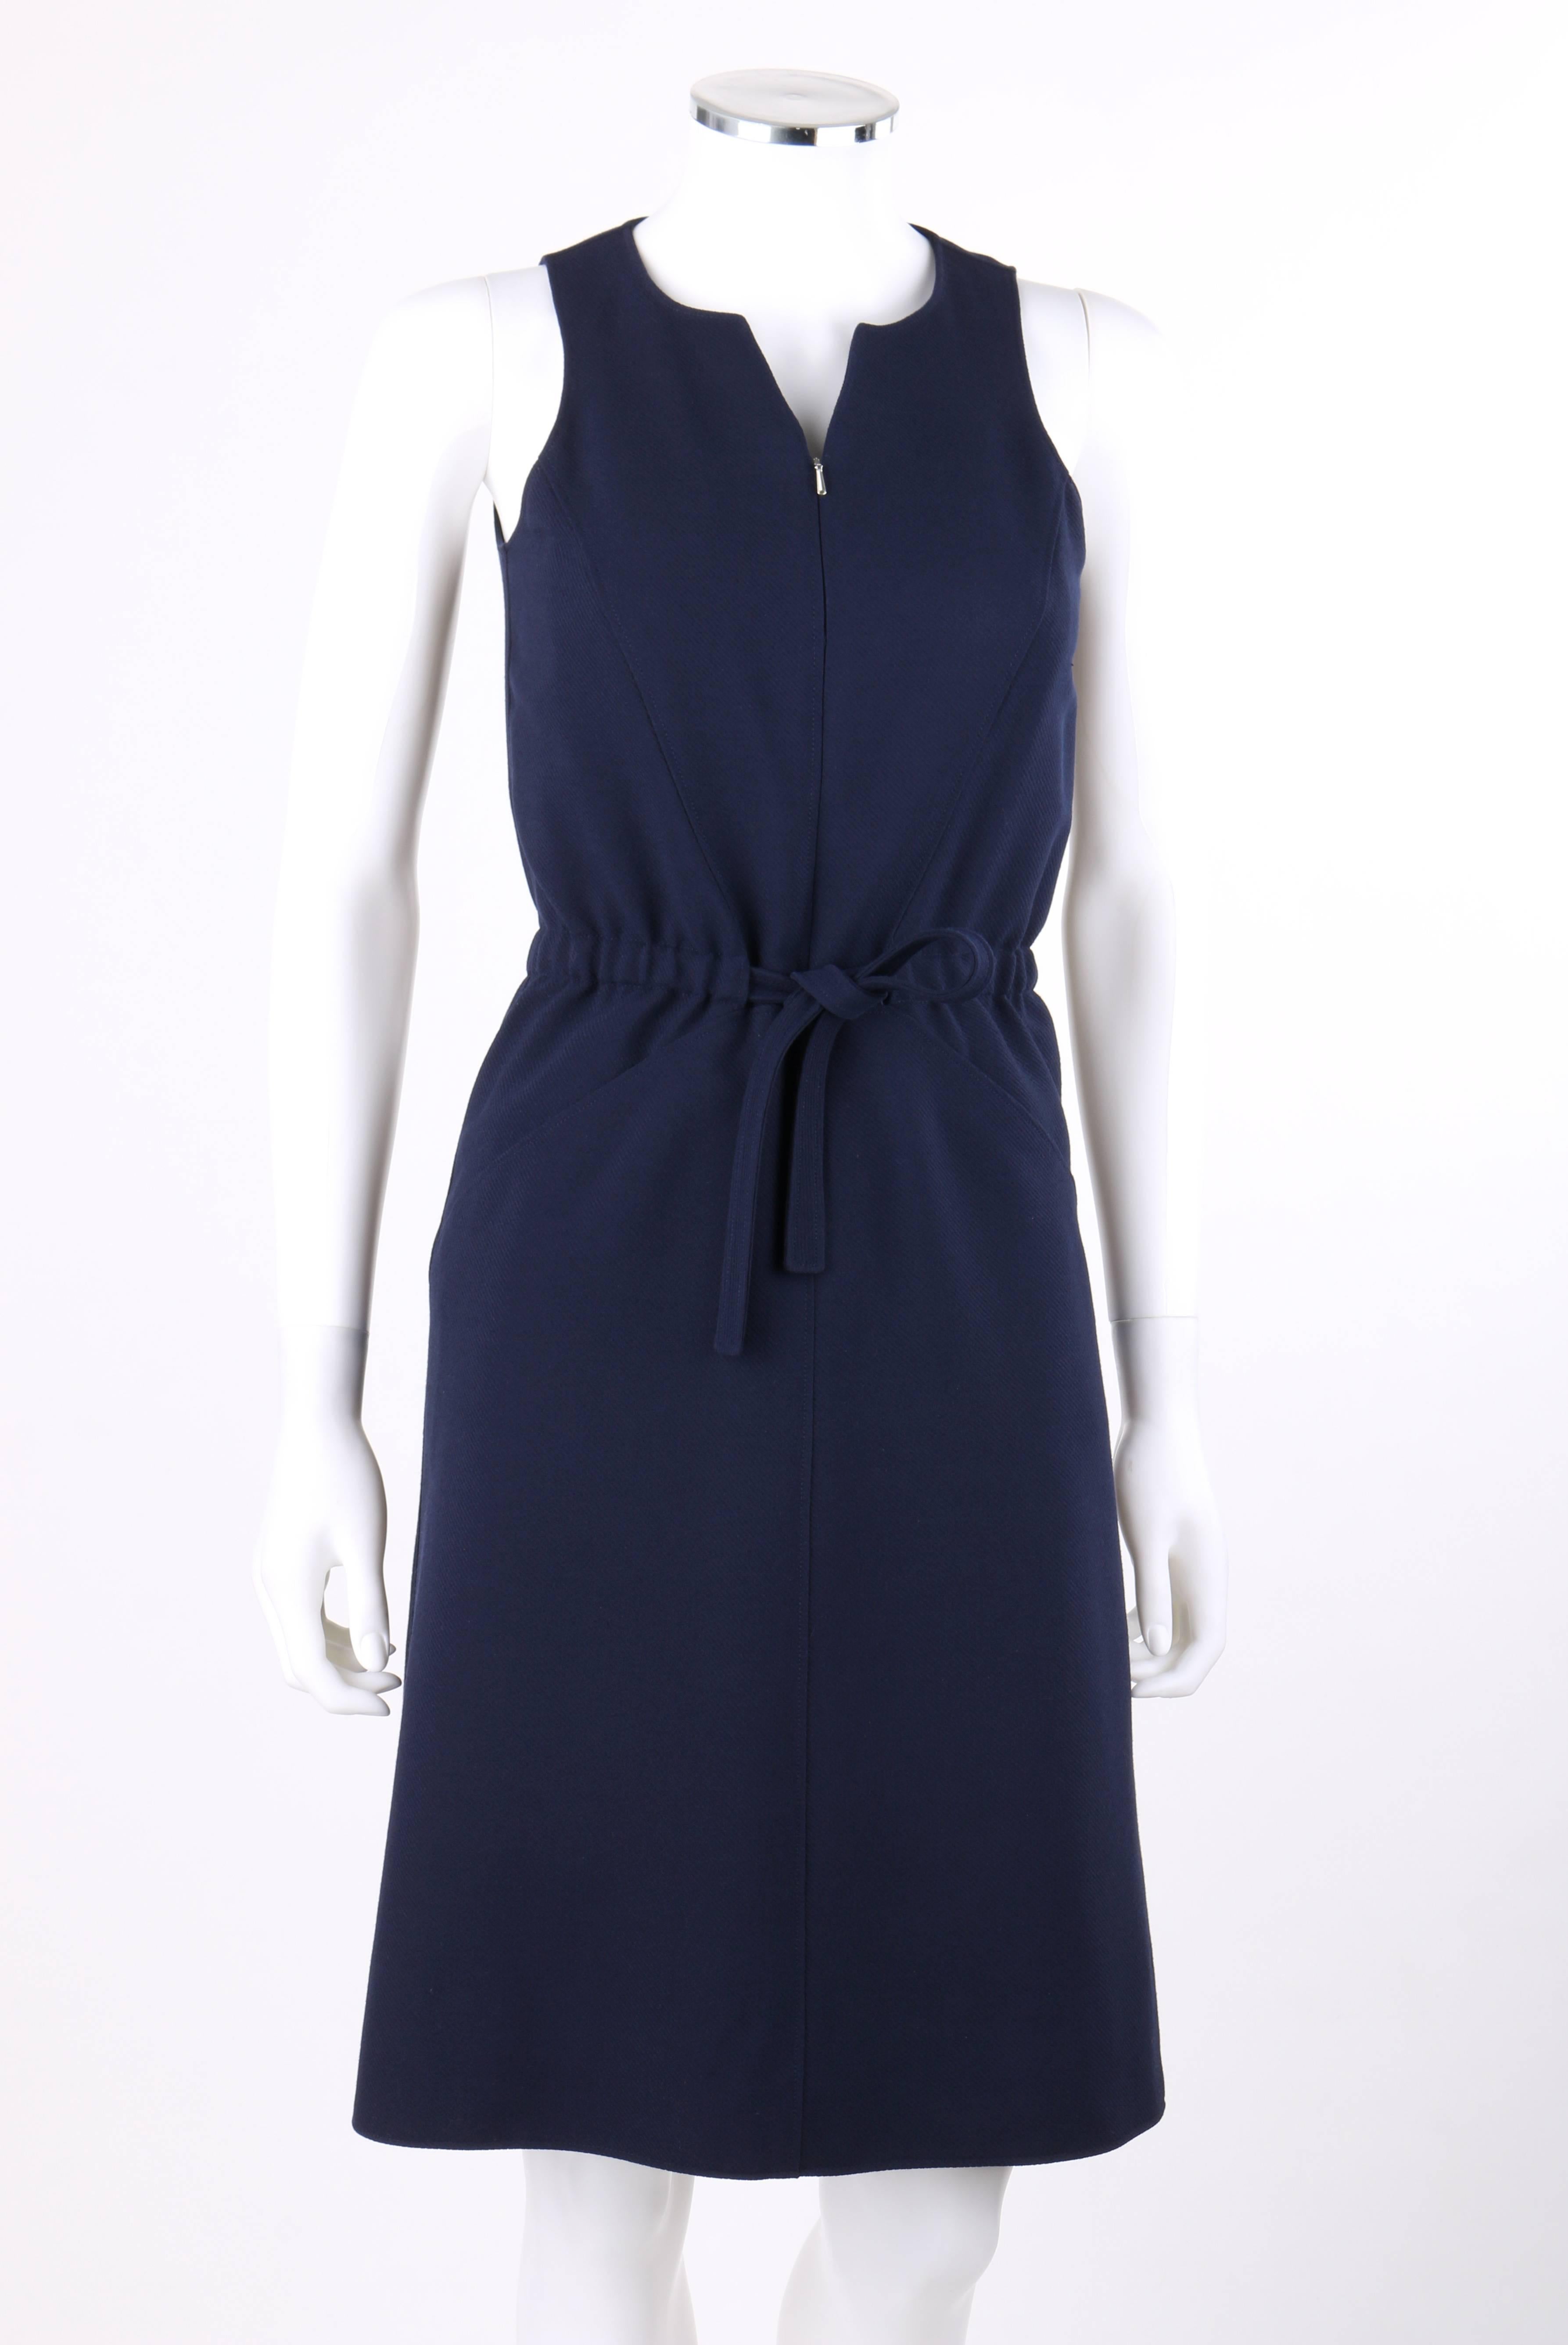 Vintage Courreges Couture Future c.1960's navy blue wool sleeveless tie waist shift dress. Designed by Andre Courreges. Slit neckline. Sleeveless. Center front 1/2 zip closure. Draw string waist with elastic at back. Two front hip pockets. Angled